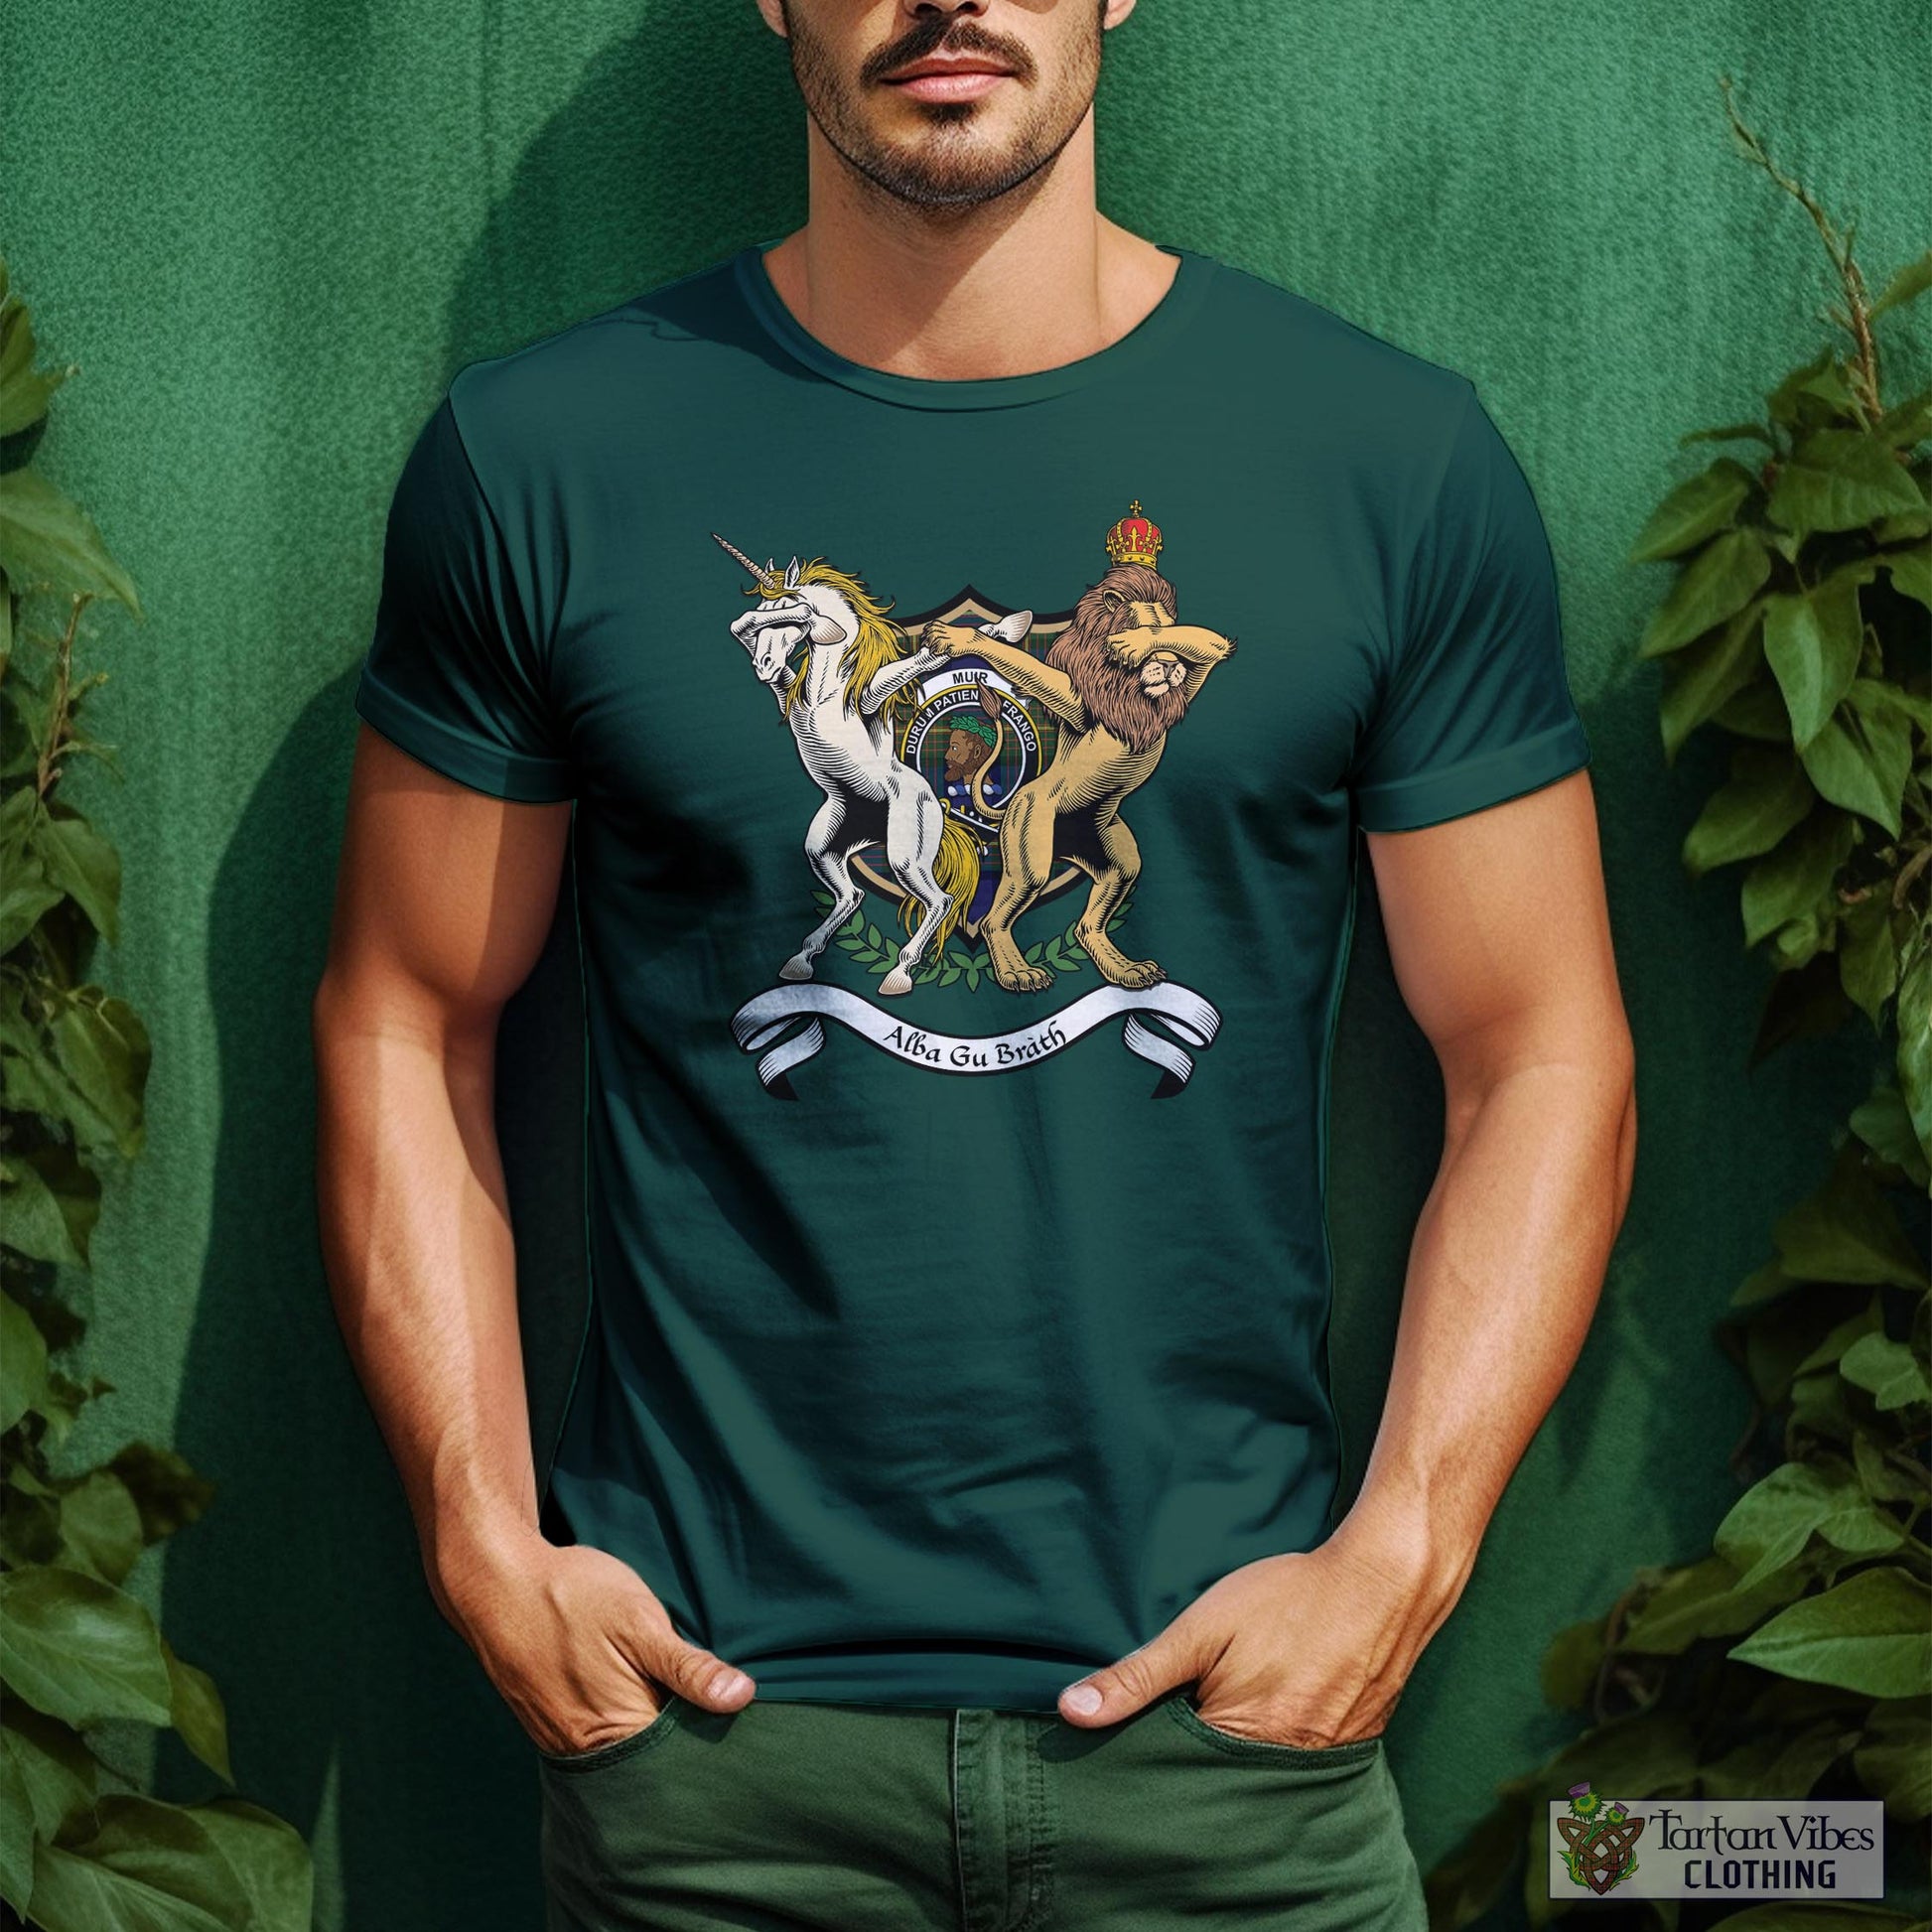 Tartan Vibes Clothing Muir Family Crest Cotton Men's T-Shirt with Scotland Royal Coat Of Arm Funny Style